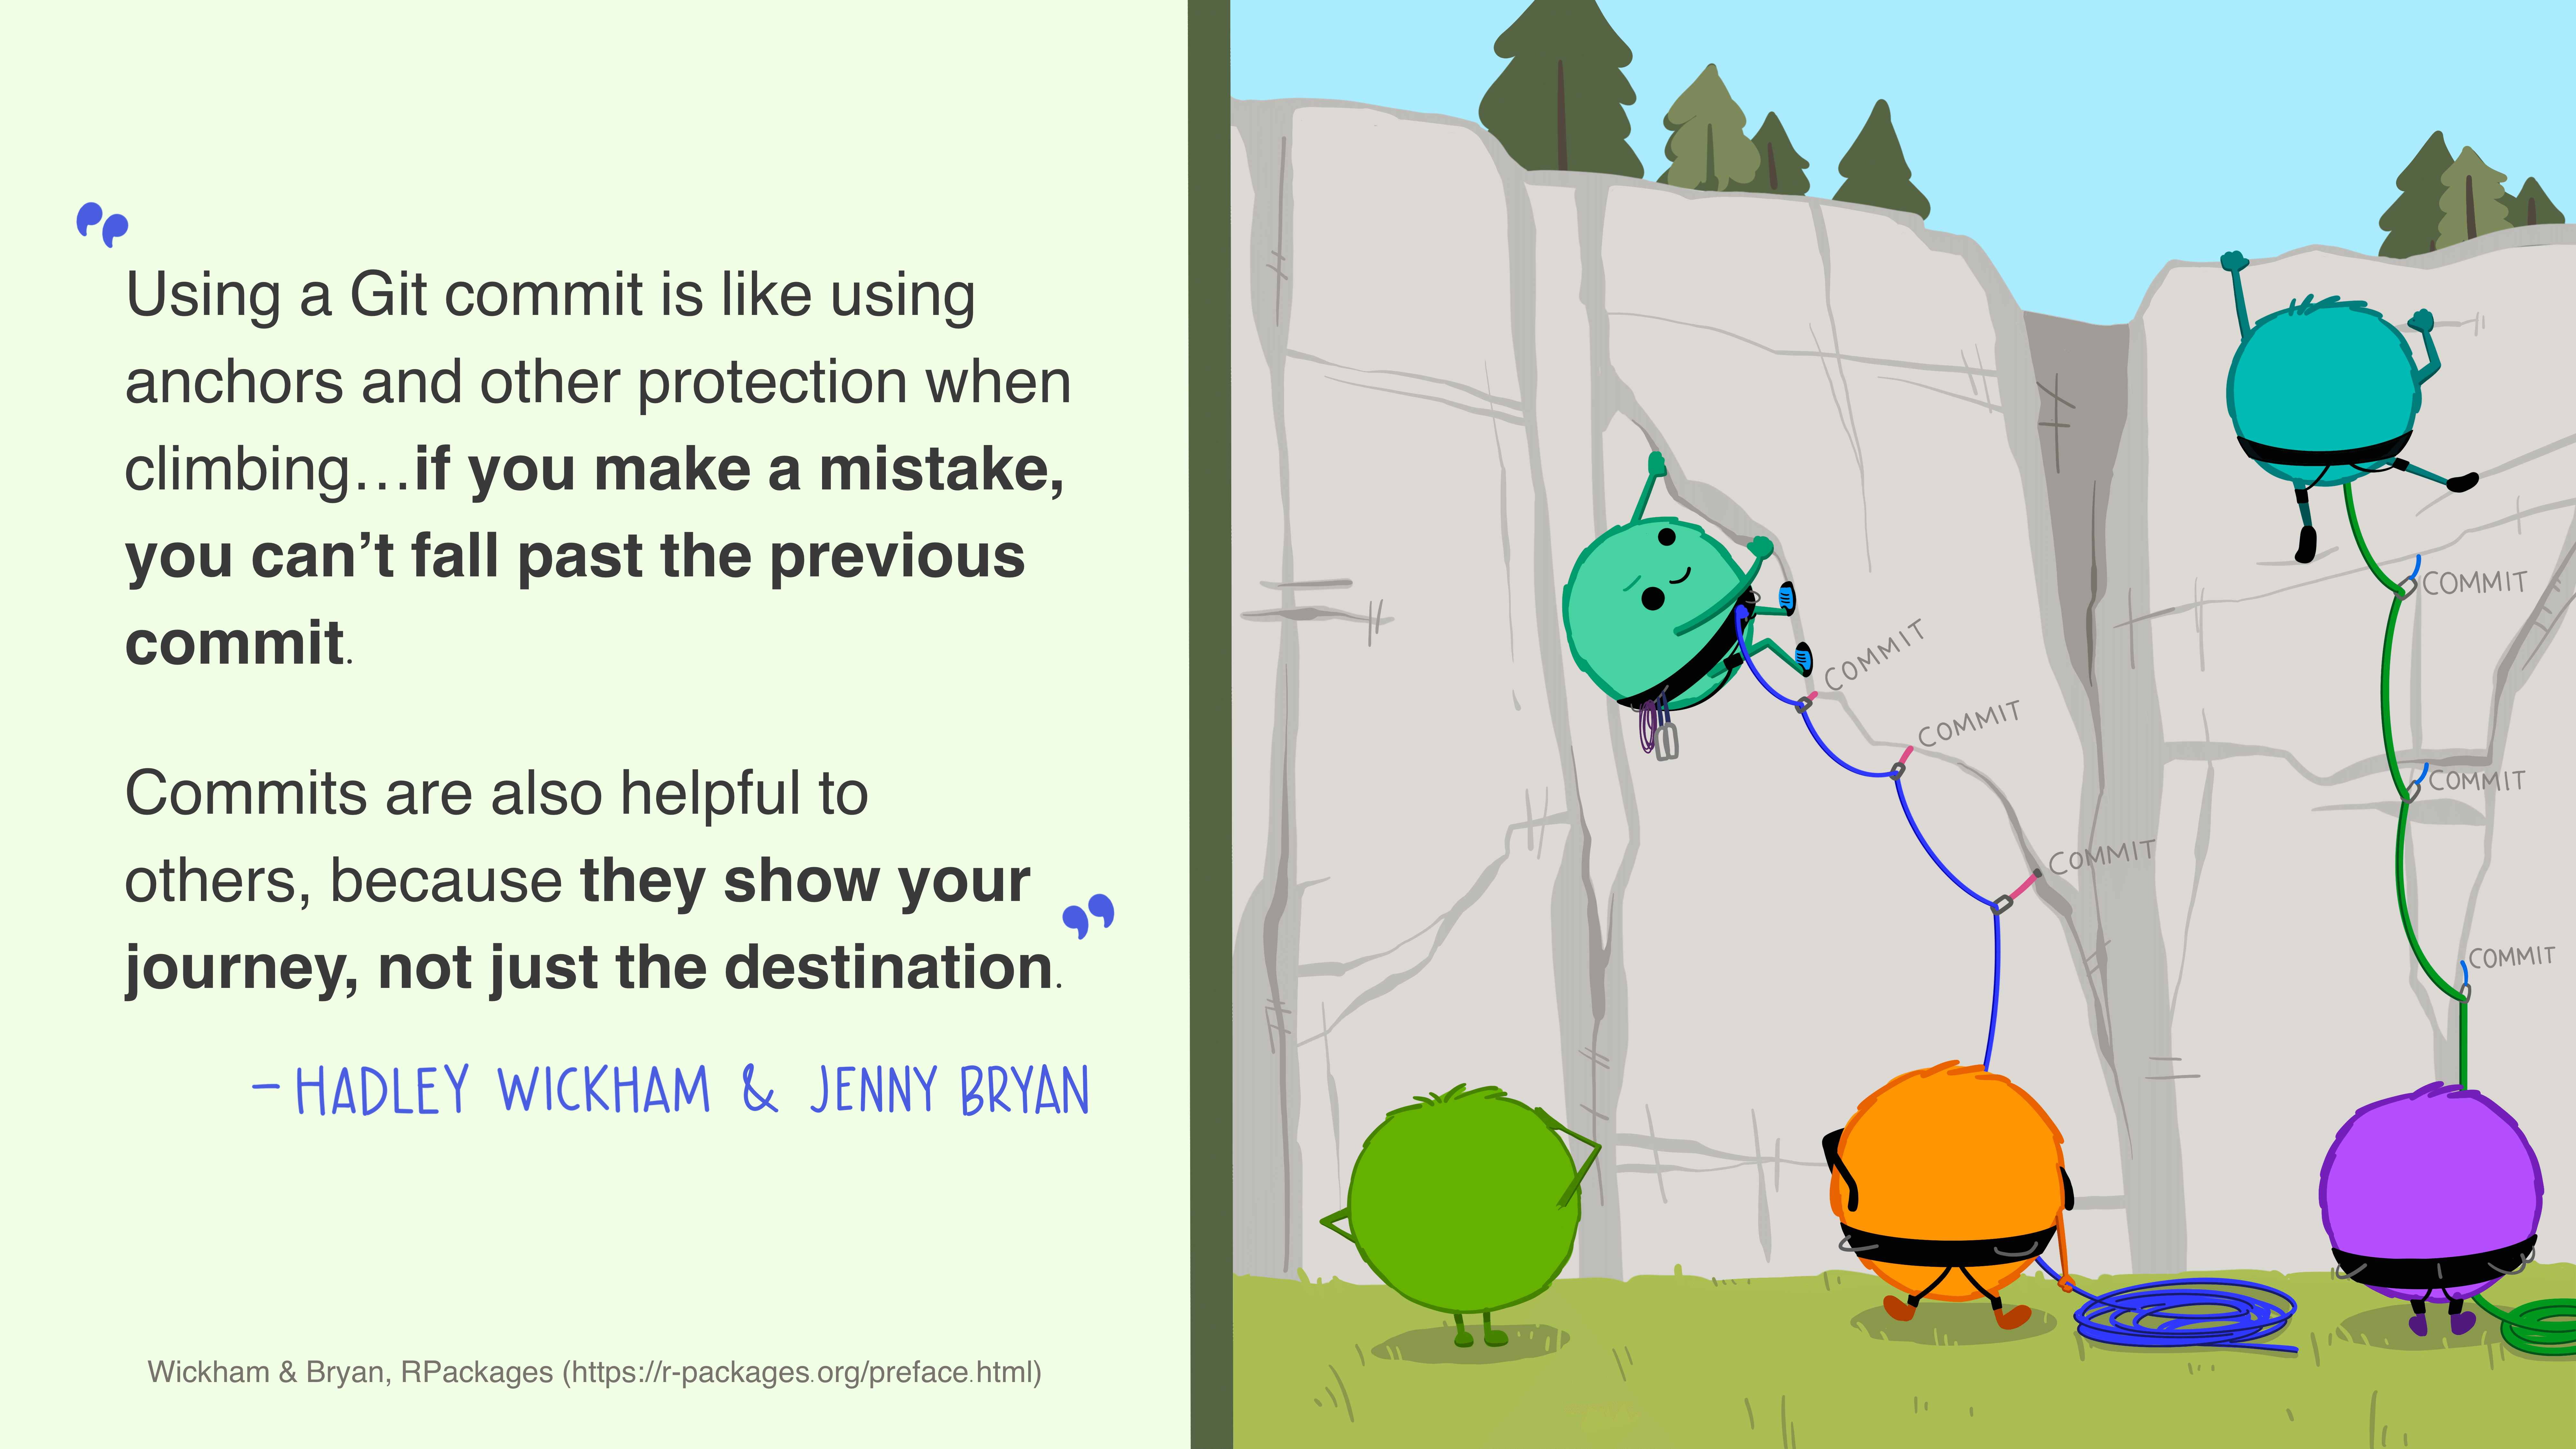 On the left is a quote from Hadley Wickham and Jenny Bryan that says 'Using a Git commit is like using anchors and other protection when climbing...if you make a mistake you can't fall past the previous commit. Commits are also helpful to others, because they show your journey, not just the destination.' On the right, two little monsters climb a cliff face. Their ropes are secured by several anchors, each labeled 'Commit'. Three monsters on the ground support the climbers.